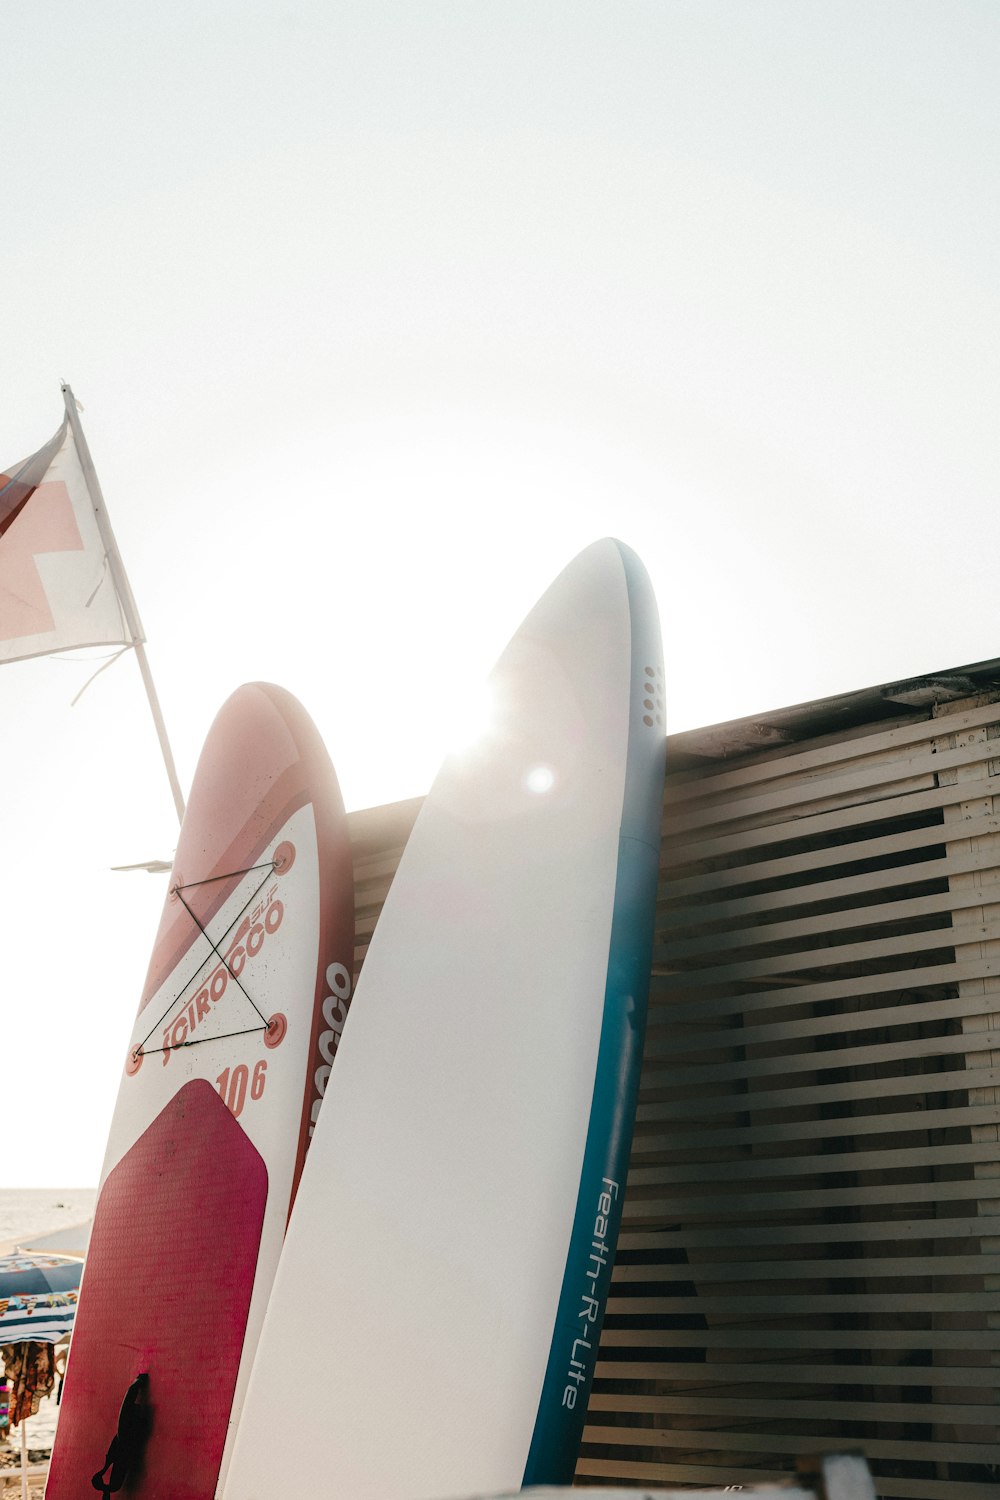 the surfboard is leaning against the wall of the building